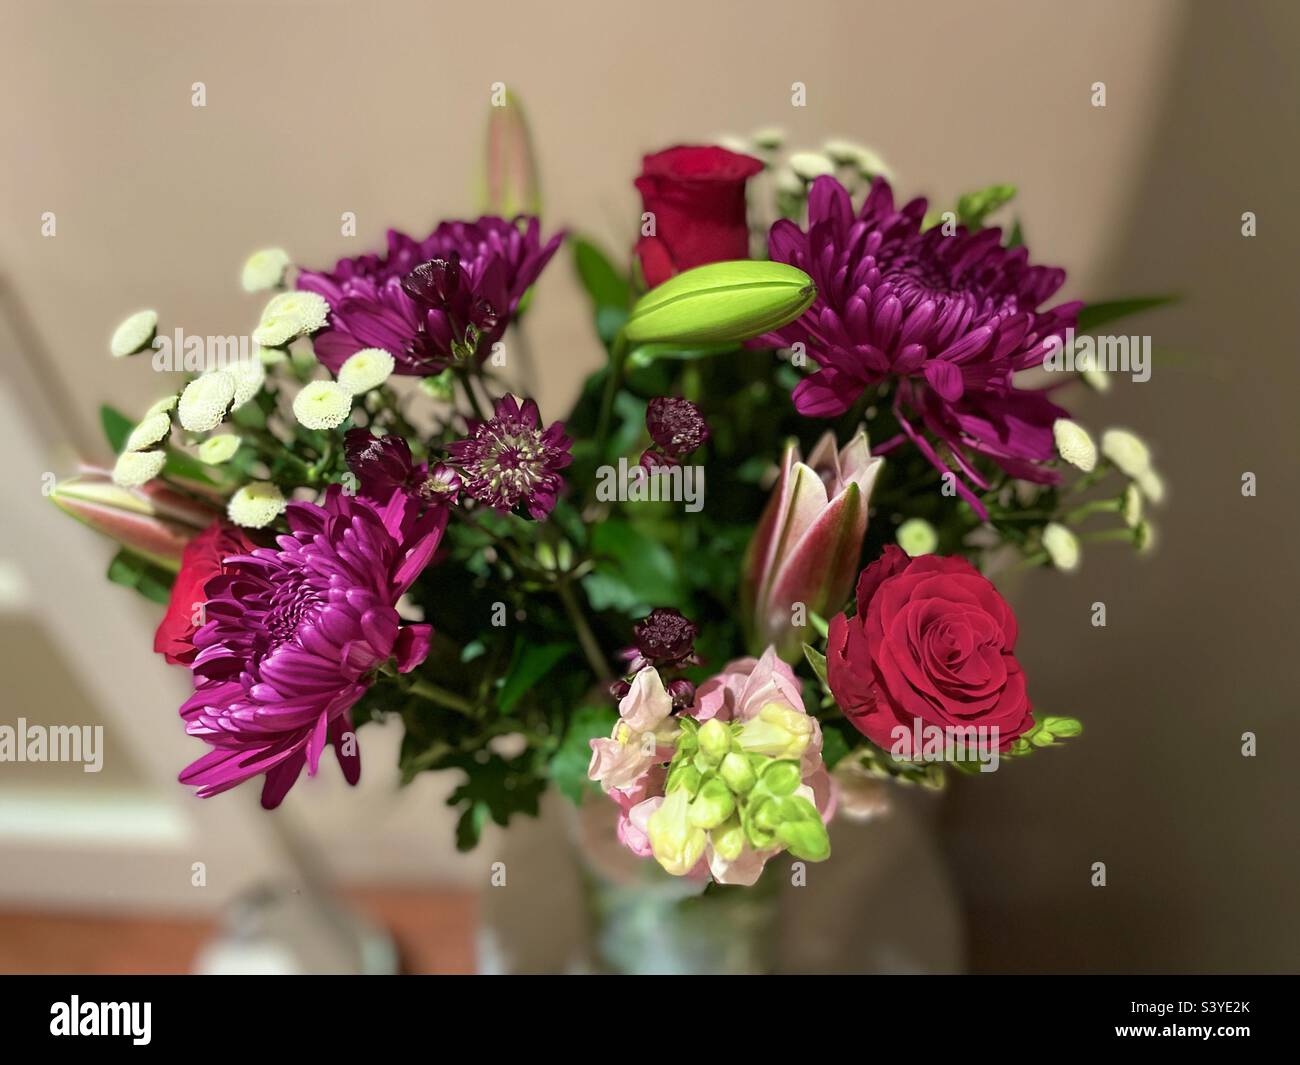 Bouquet of flowers in a vase Stock Photo